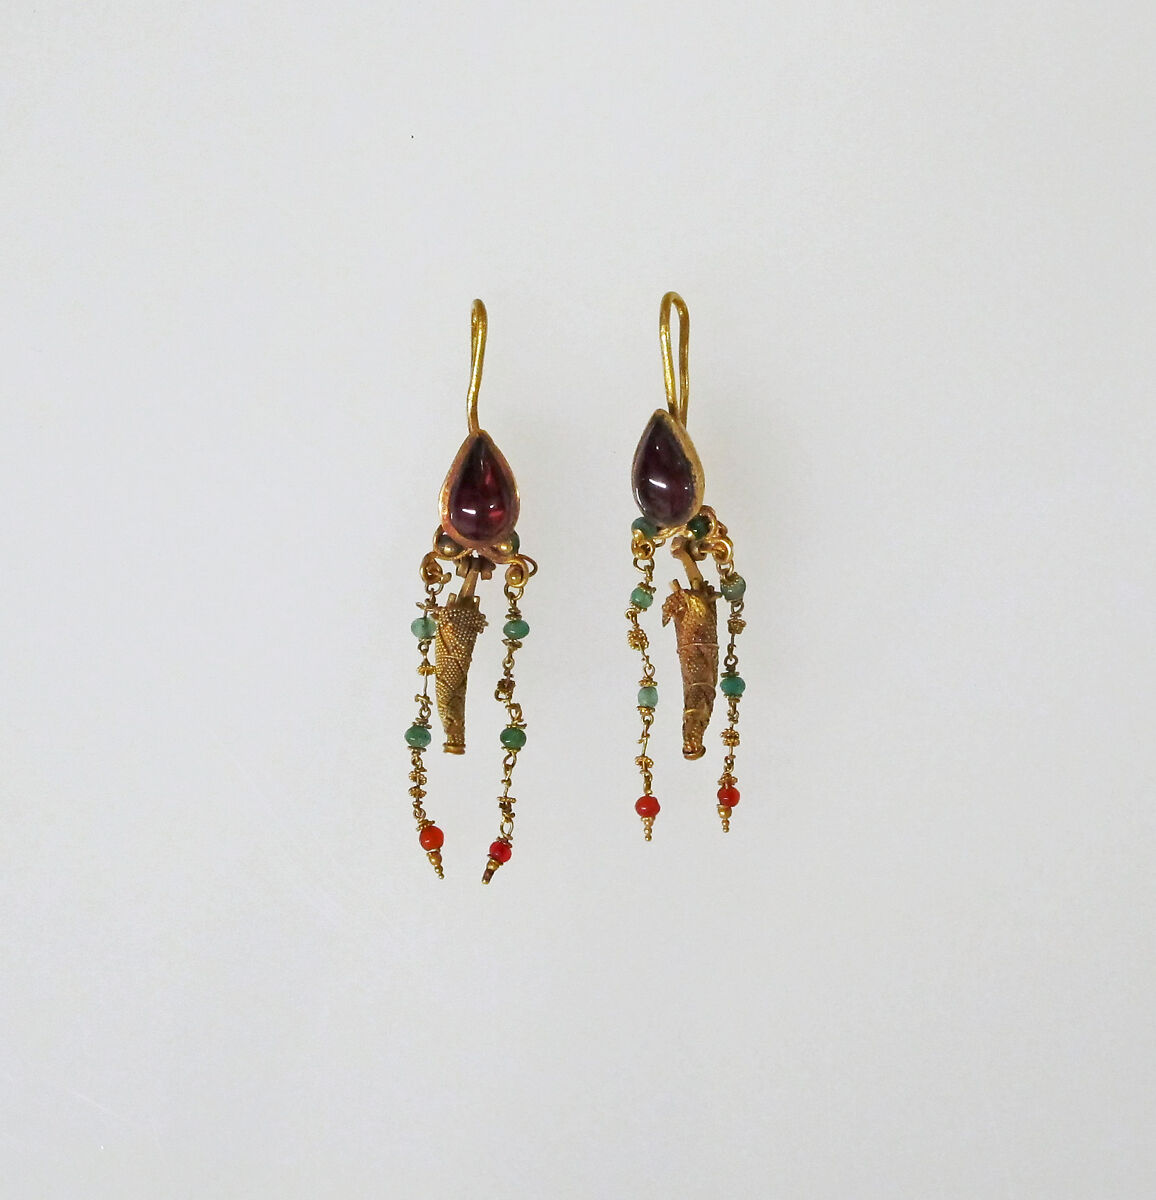 Earring with pendant and chains, Gold, garnet, Roman 